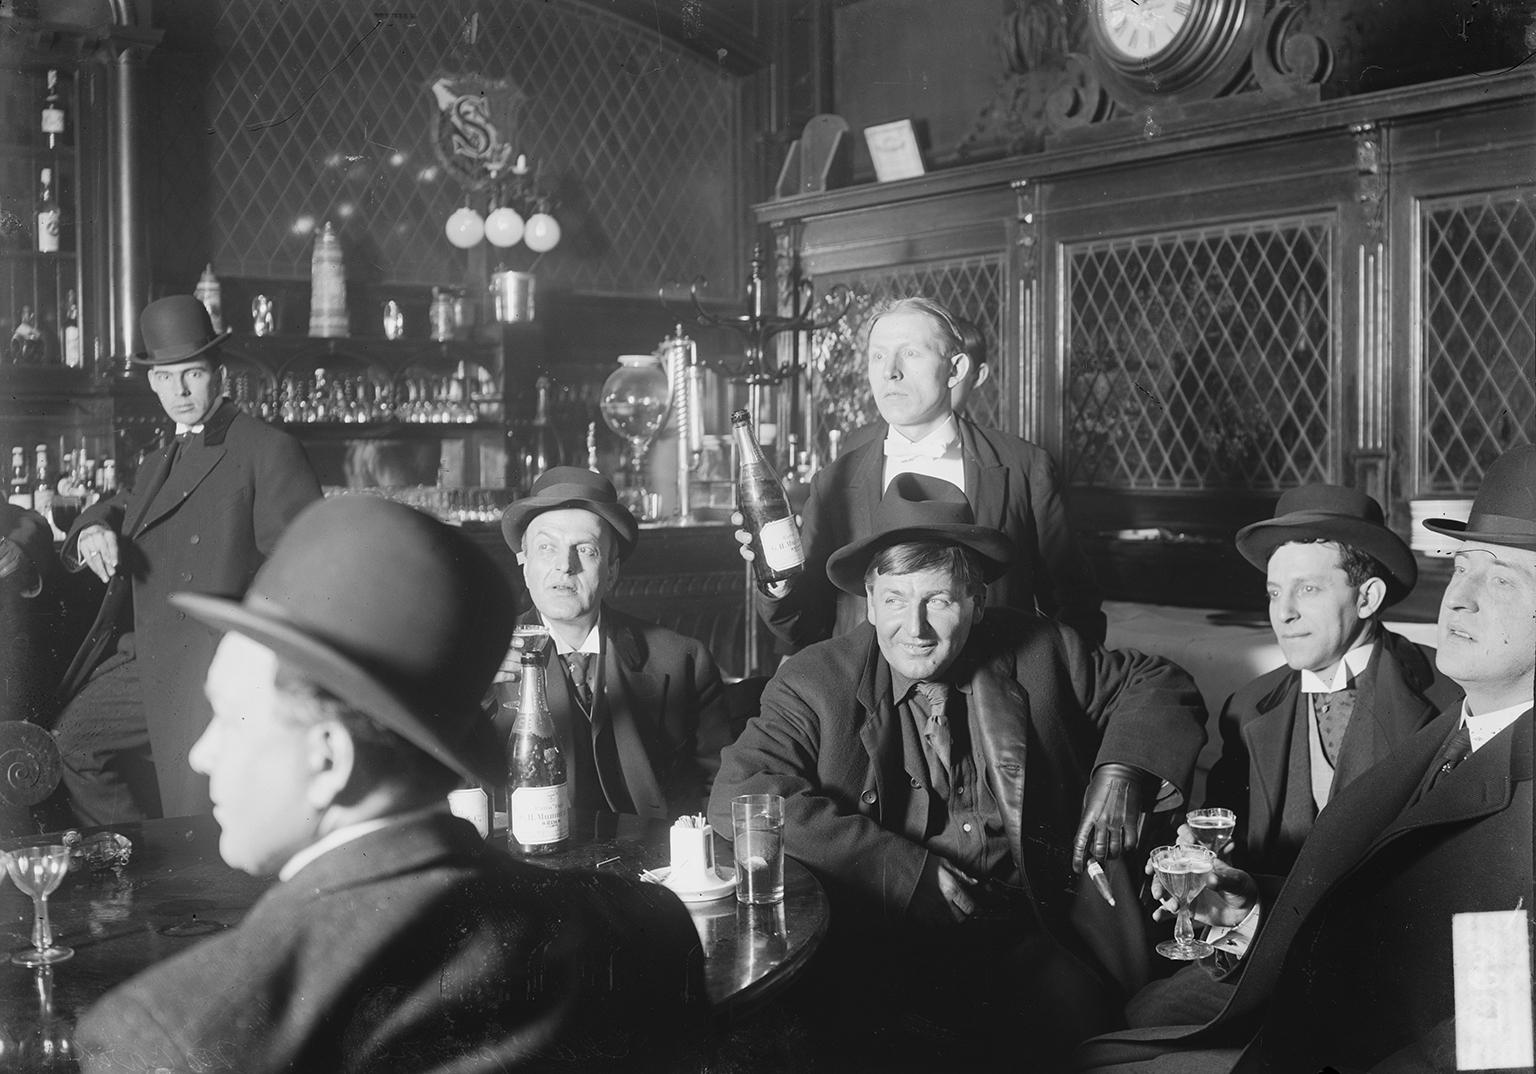 Interior of a Chicago saloon, 1905 (Chicago Daily News negatives collection / Chicago History Museum)